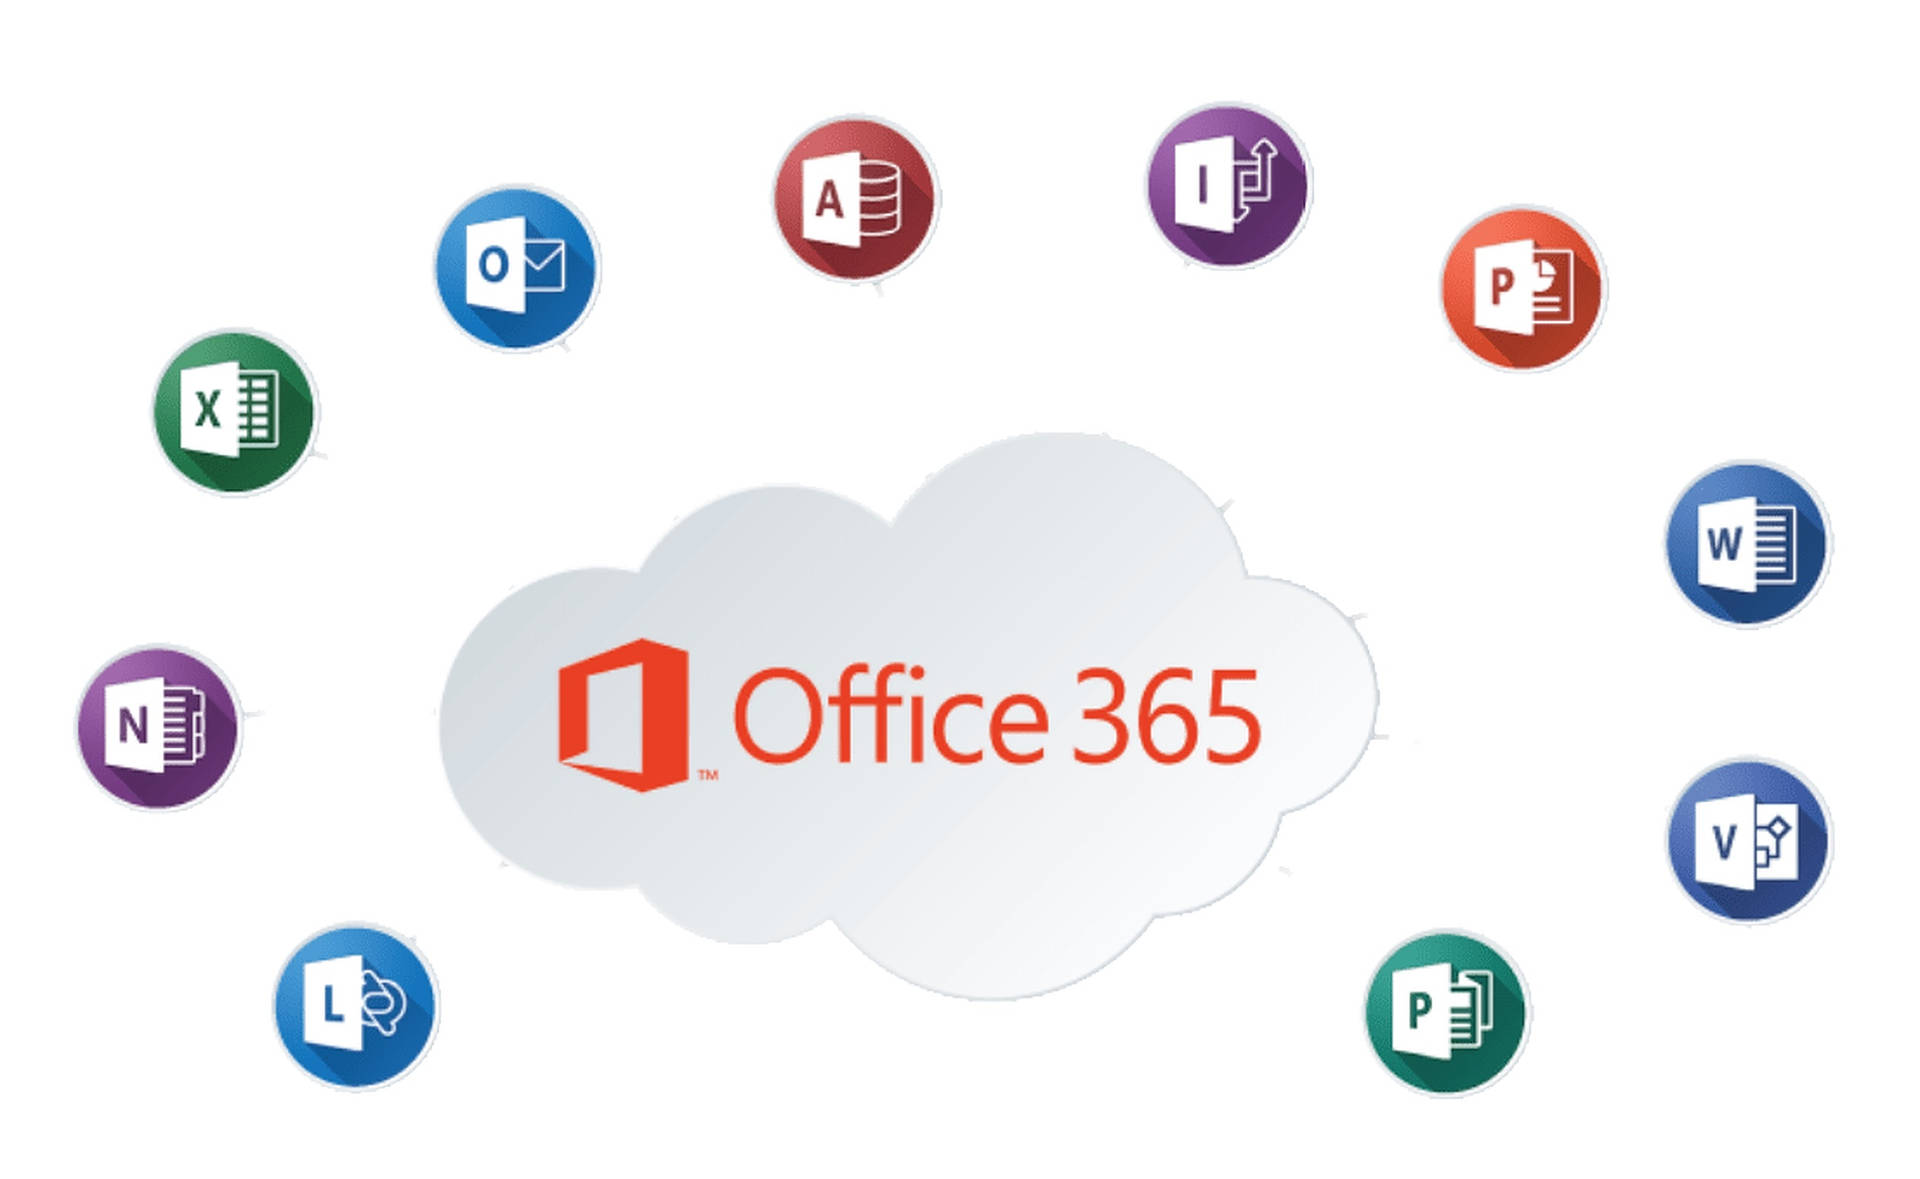 Office 365 Application Icons